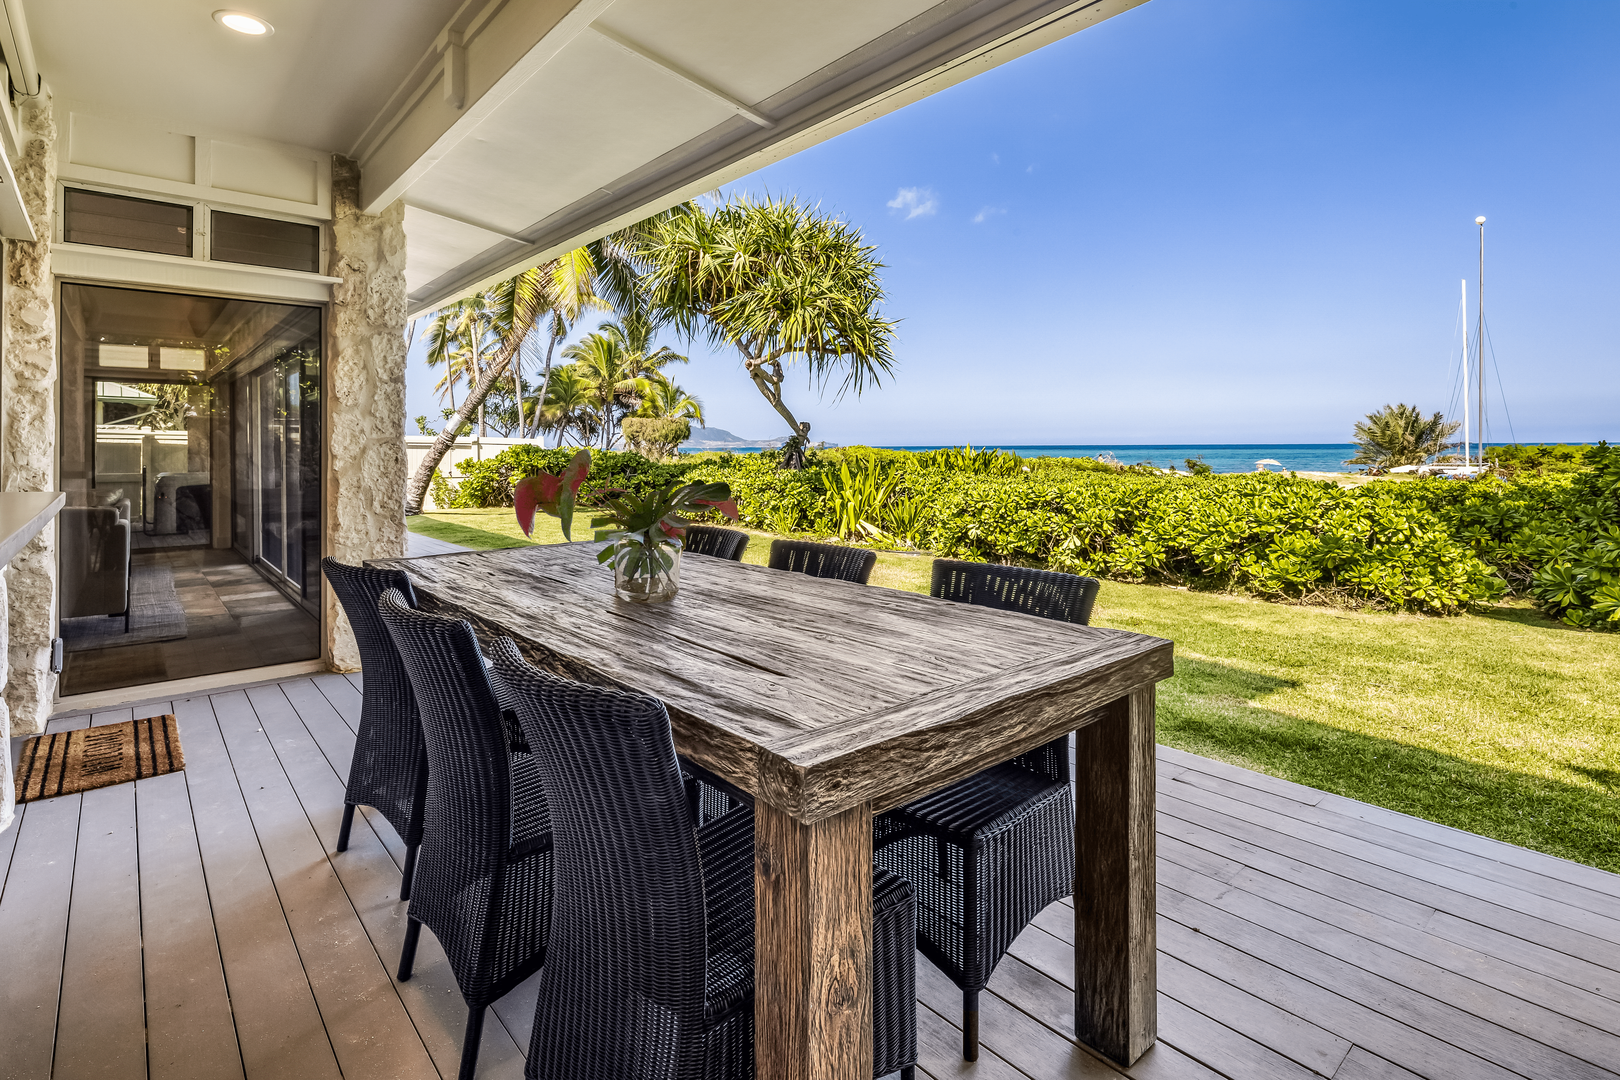 Kailua Vacation Rentals, Na Makana Villa - Take in beautiful sea views from the roomy outdoor dining area with seating for six